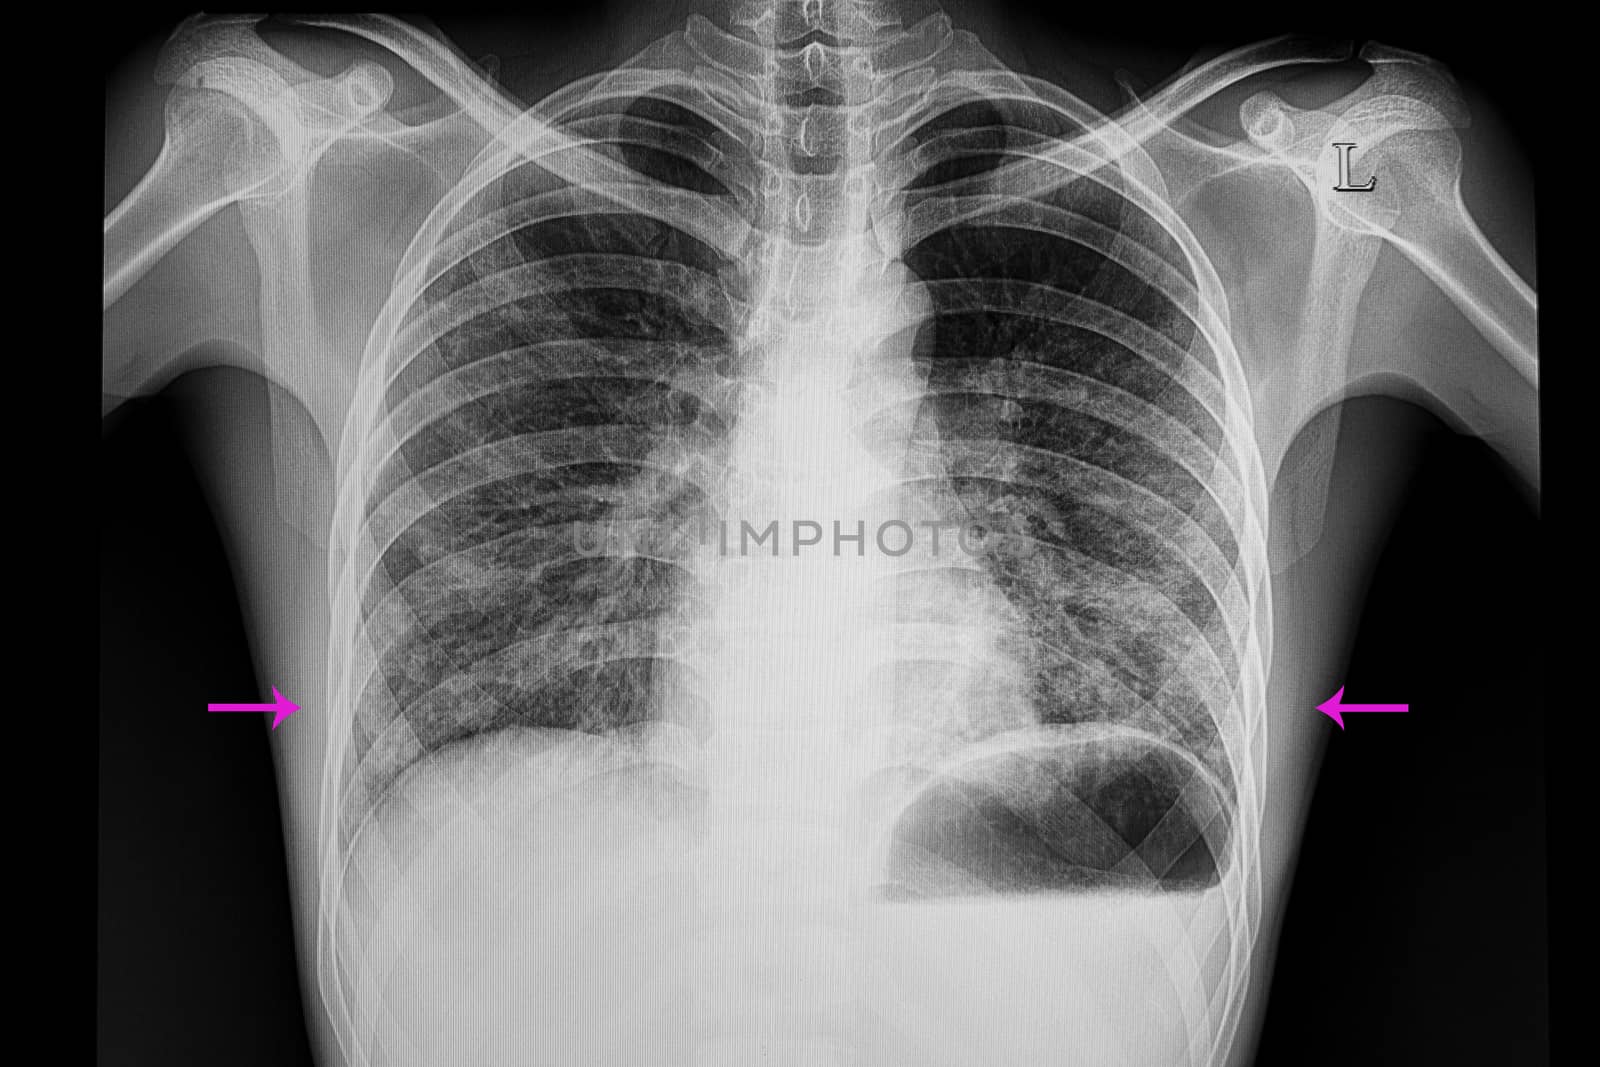 chest xray film of a patient with bilateral lower lungs pneumonia.